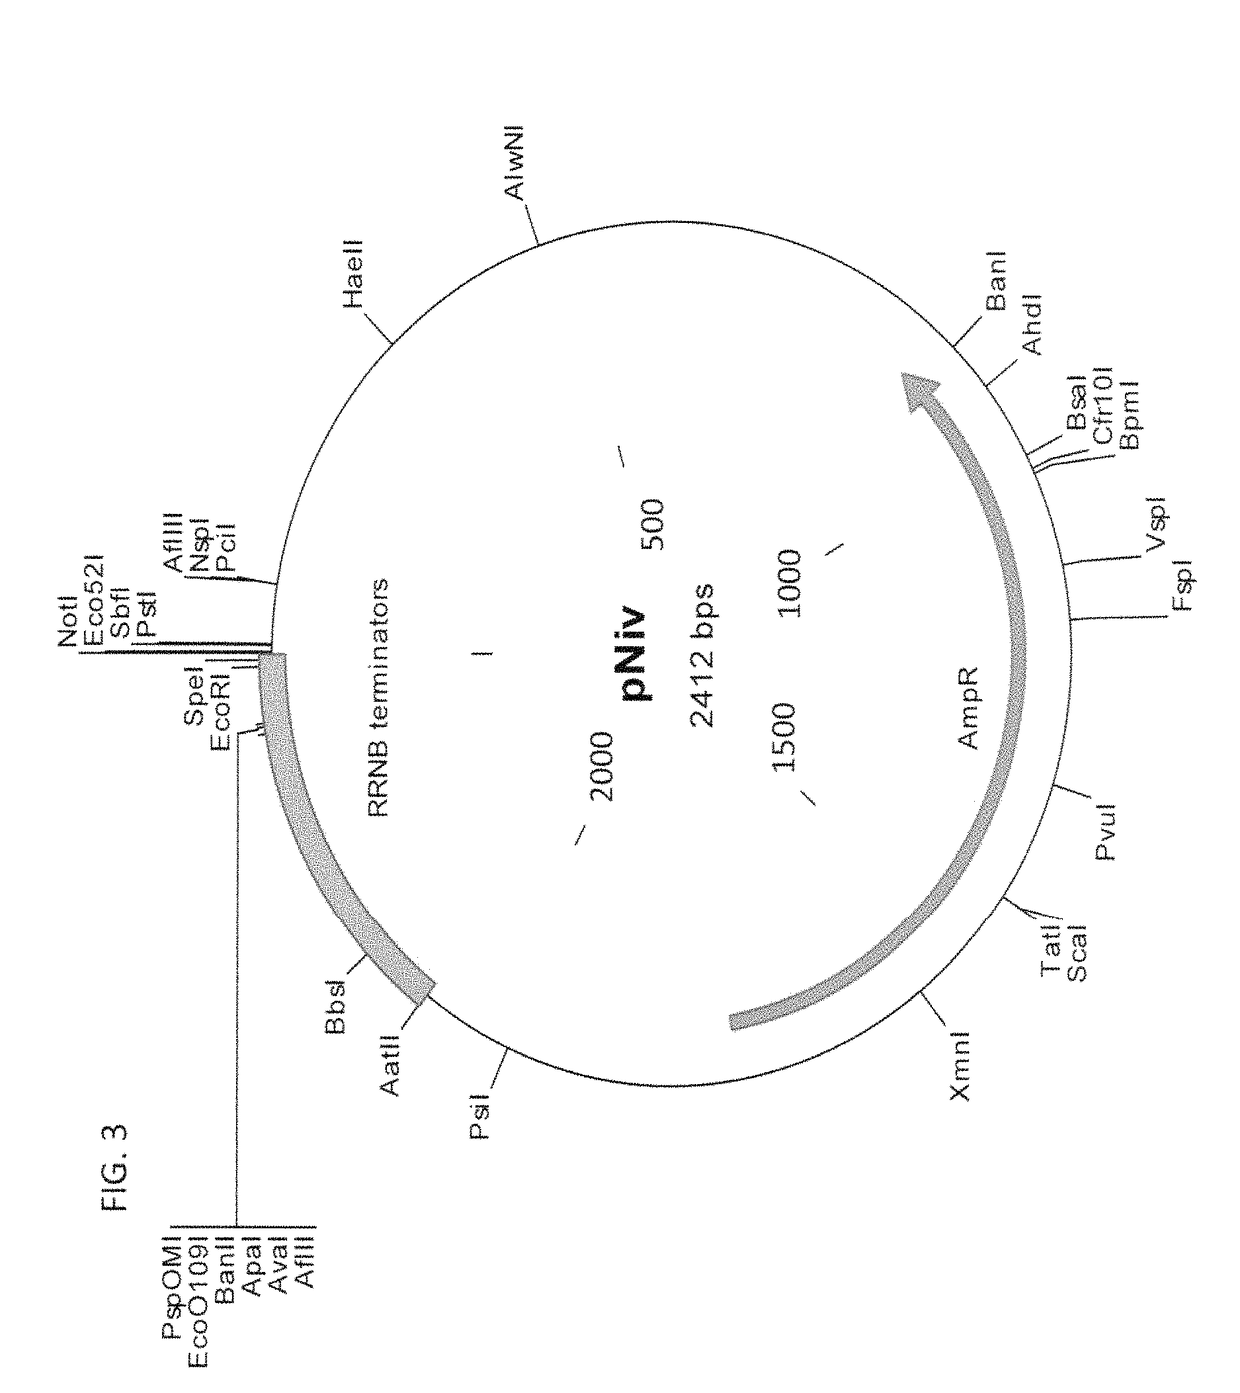 Methods of production of products of metabolic pathways